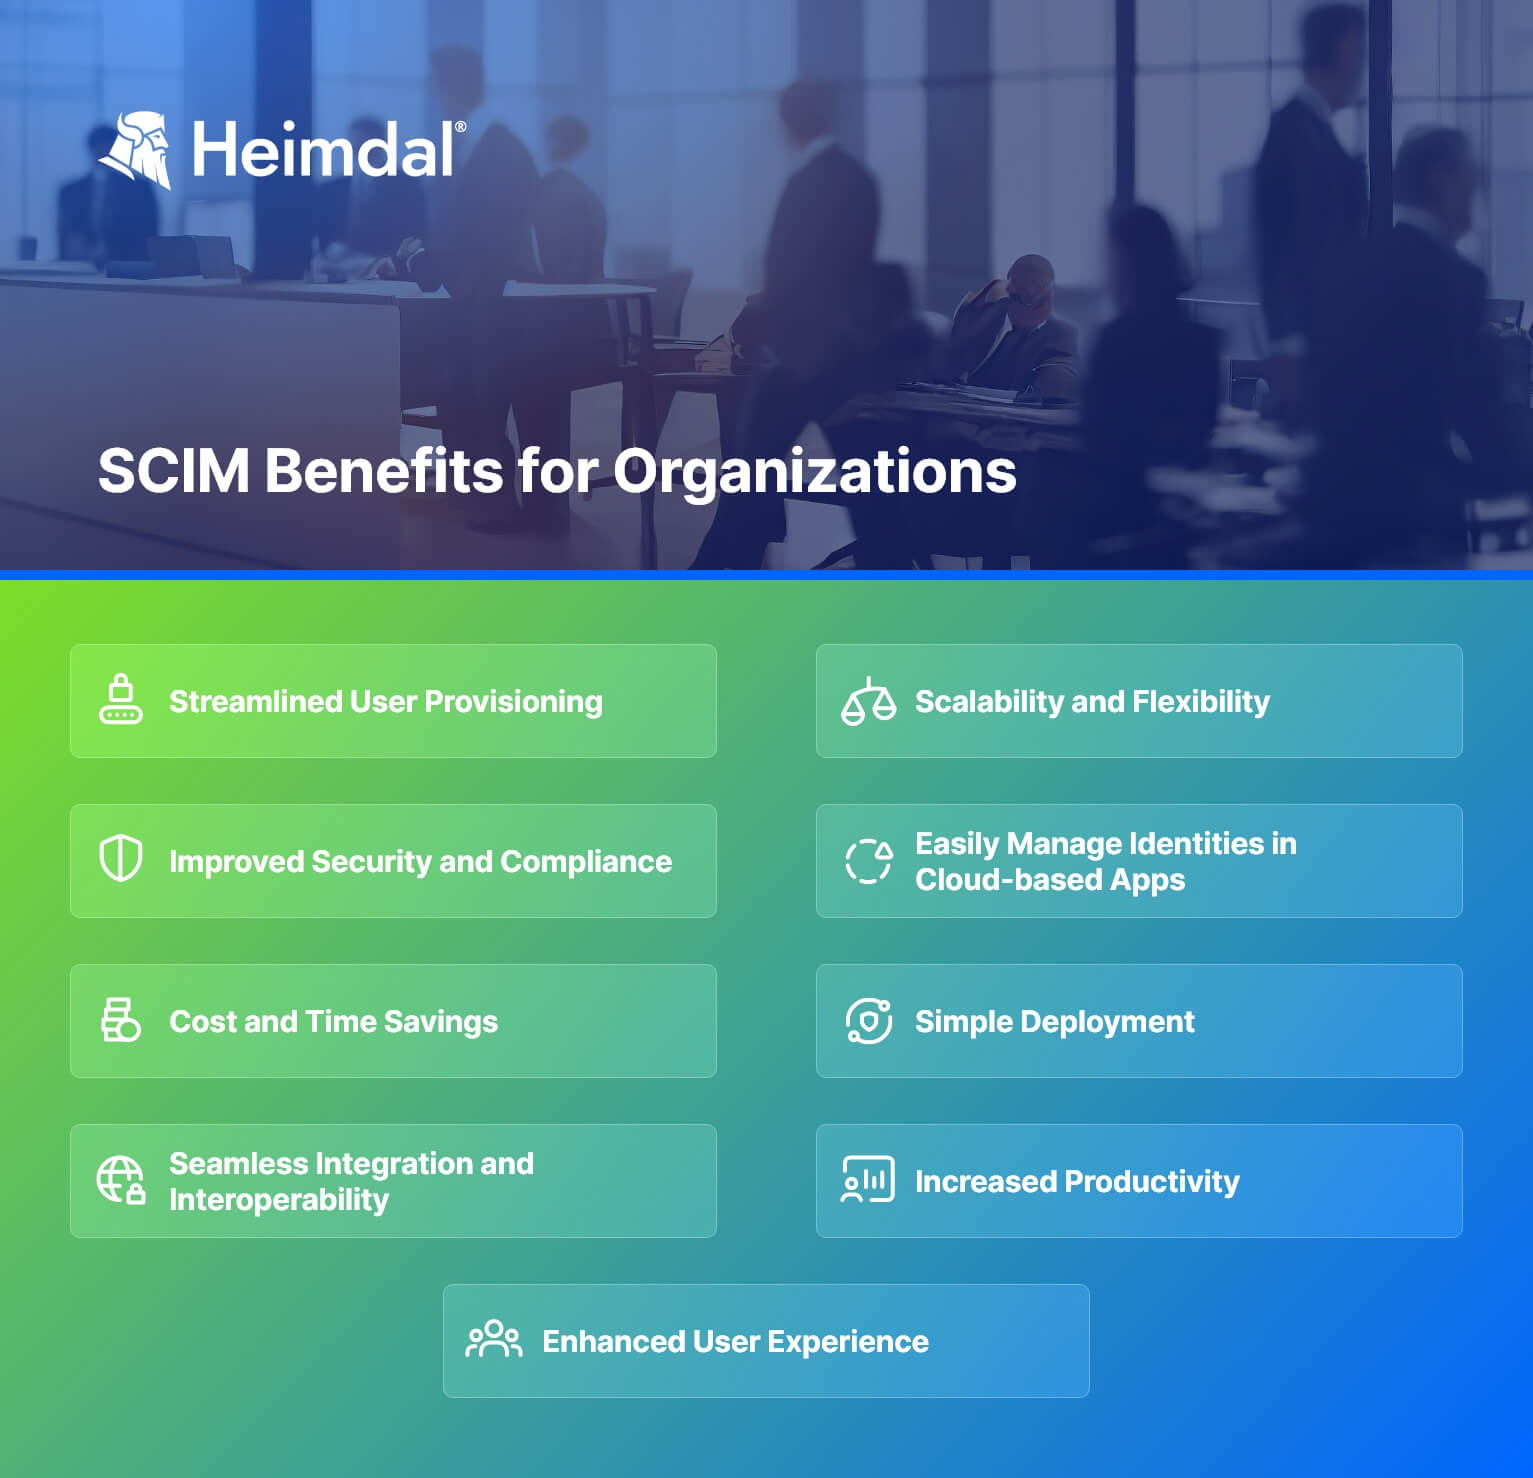 Picture for Heimdal's blog showing SCIM benefits for companies